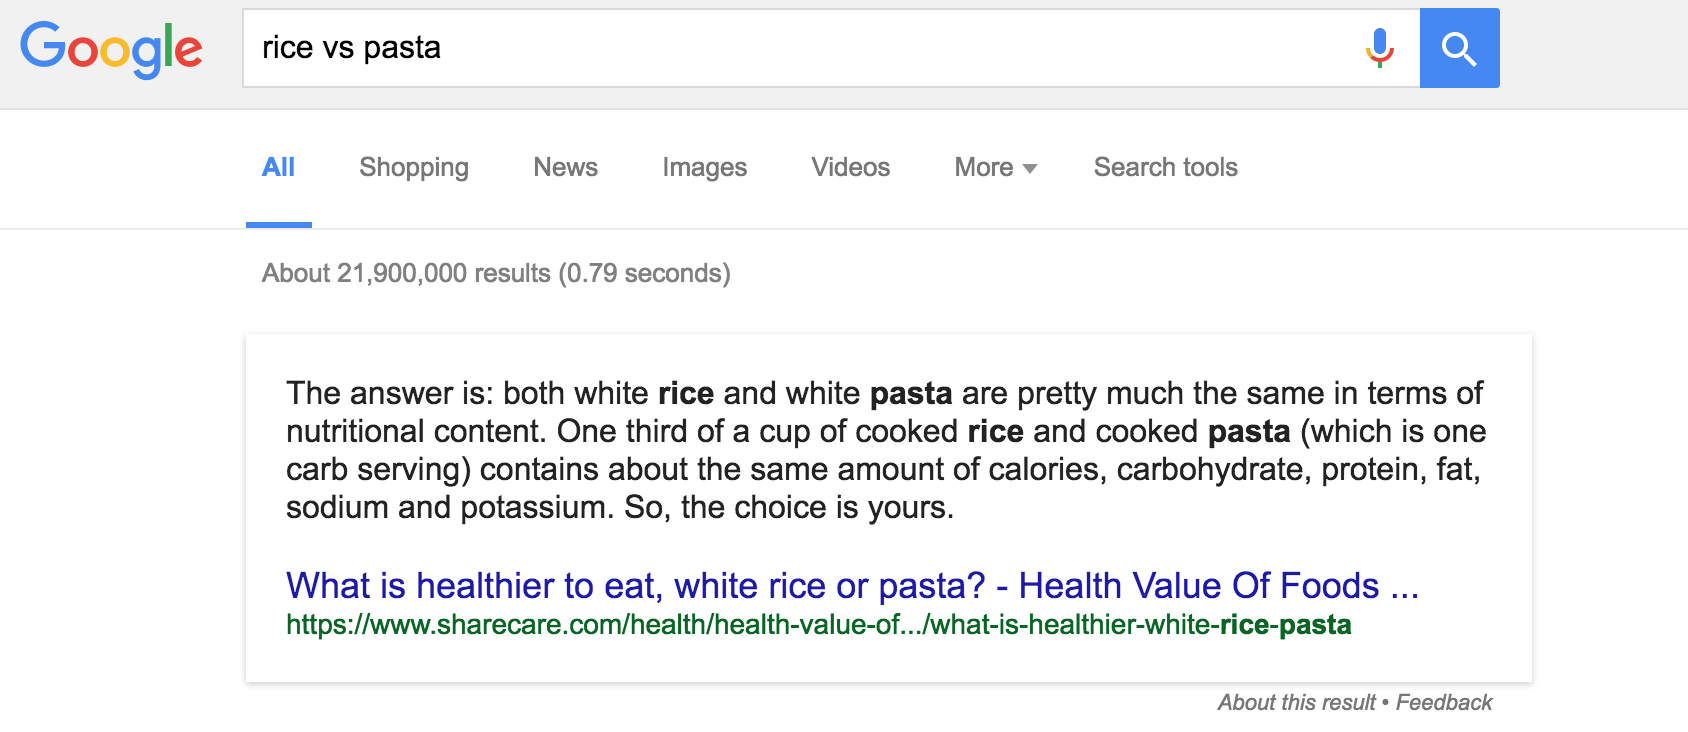 Image showing search comparison of rice and pasta